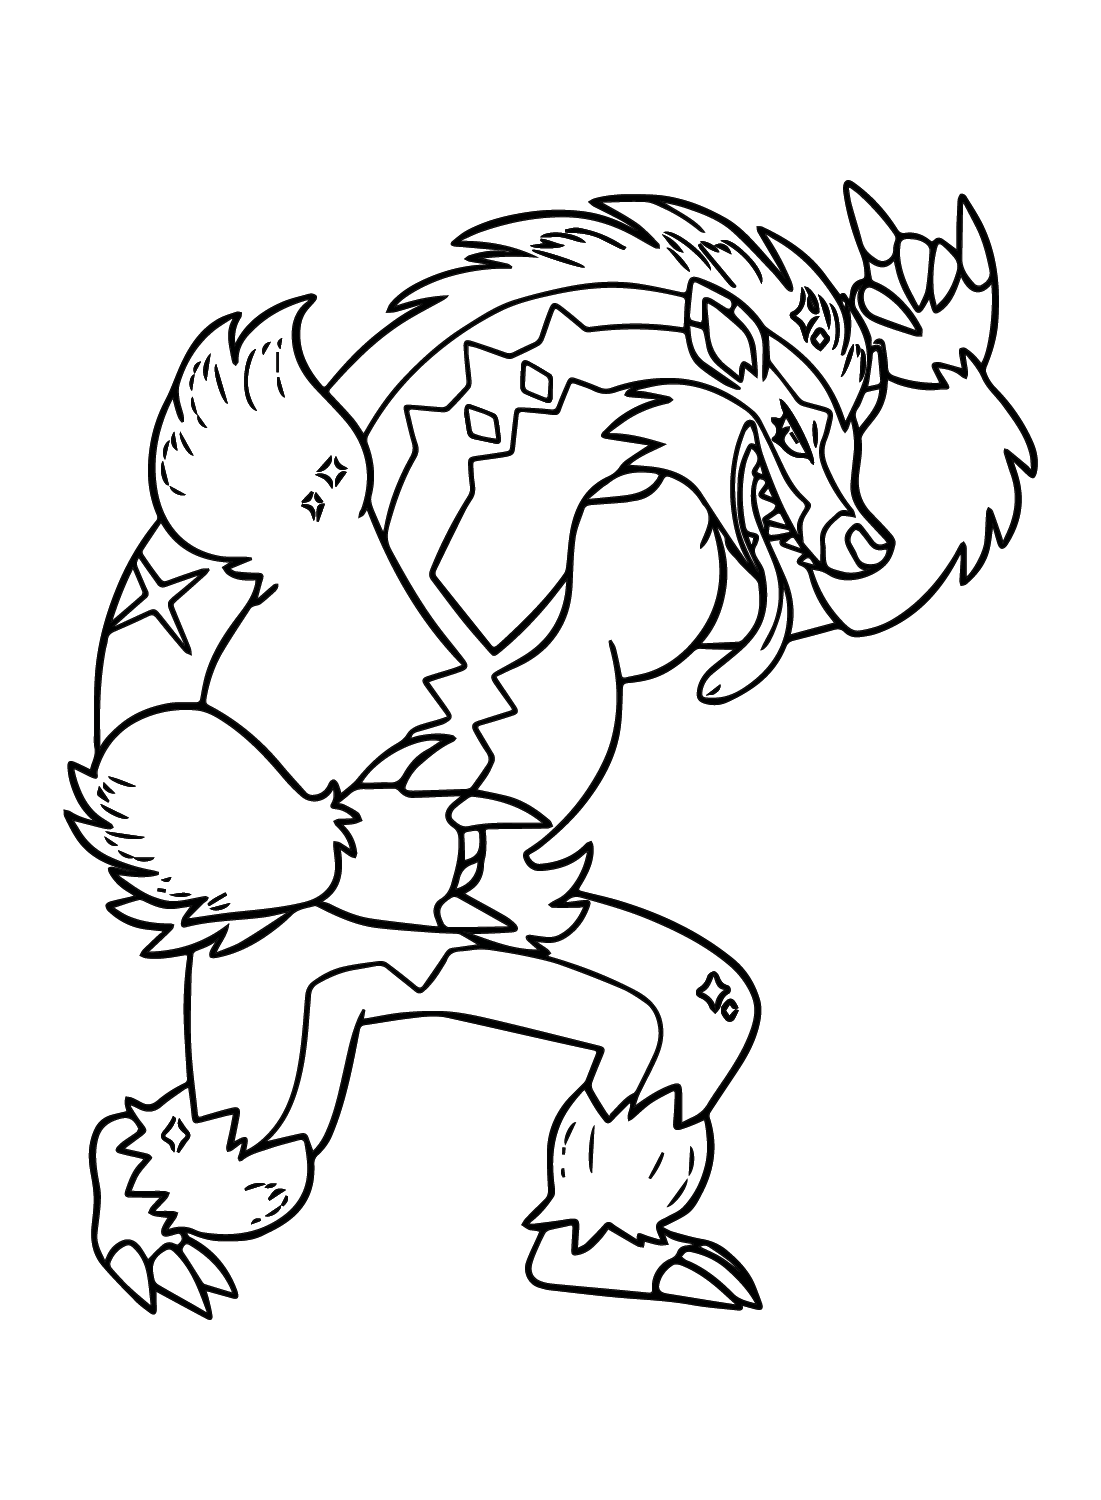 Obstagoon for Kids Coloring Page